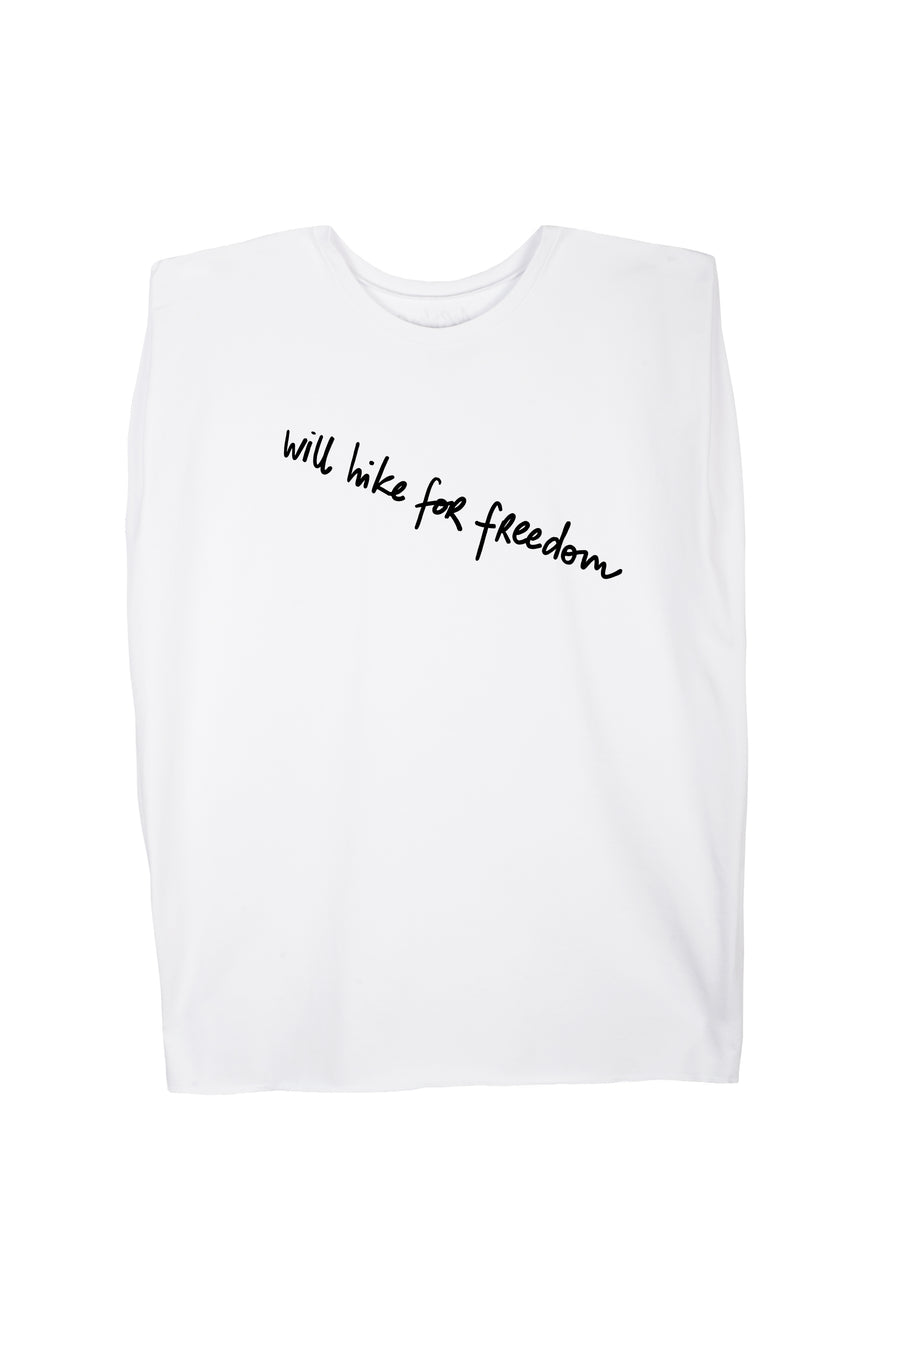 WILL HIKE FOR FREEDOM Sleeveless T-shirt